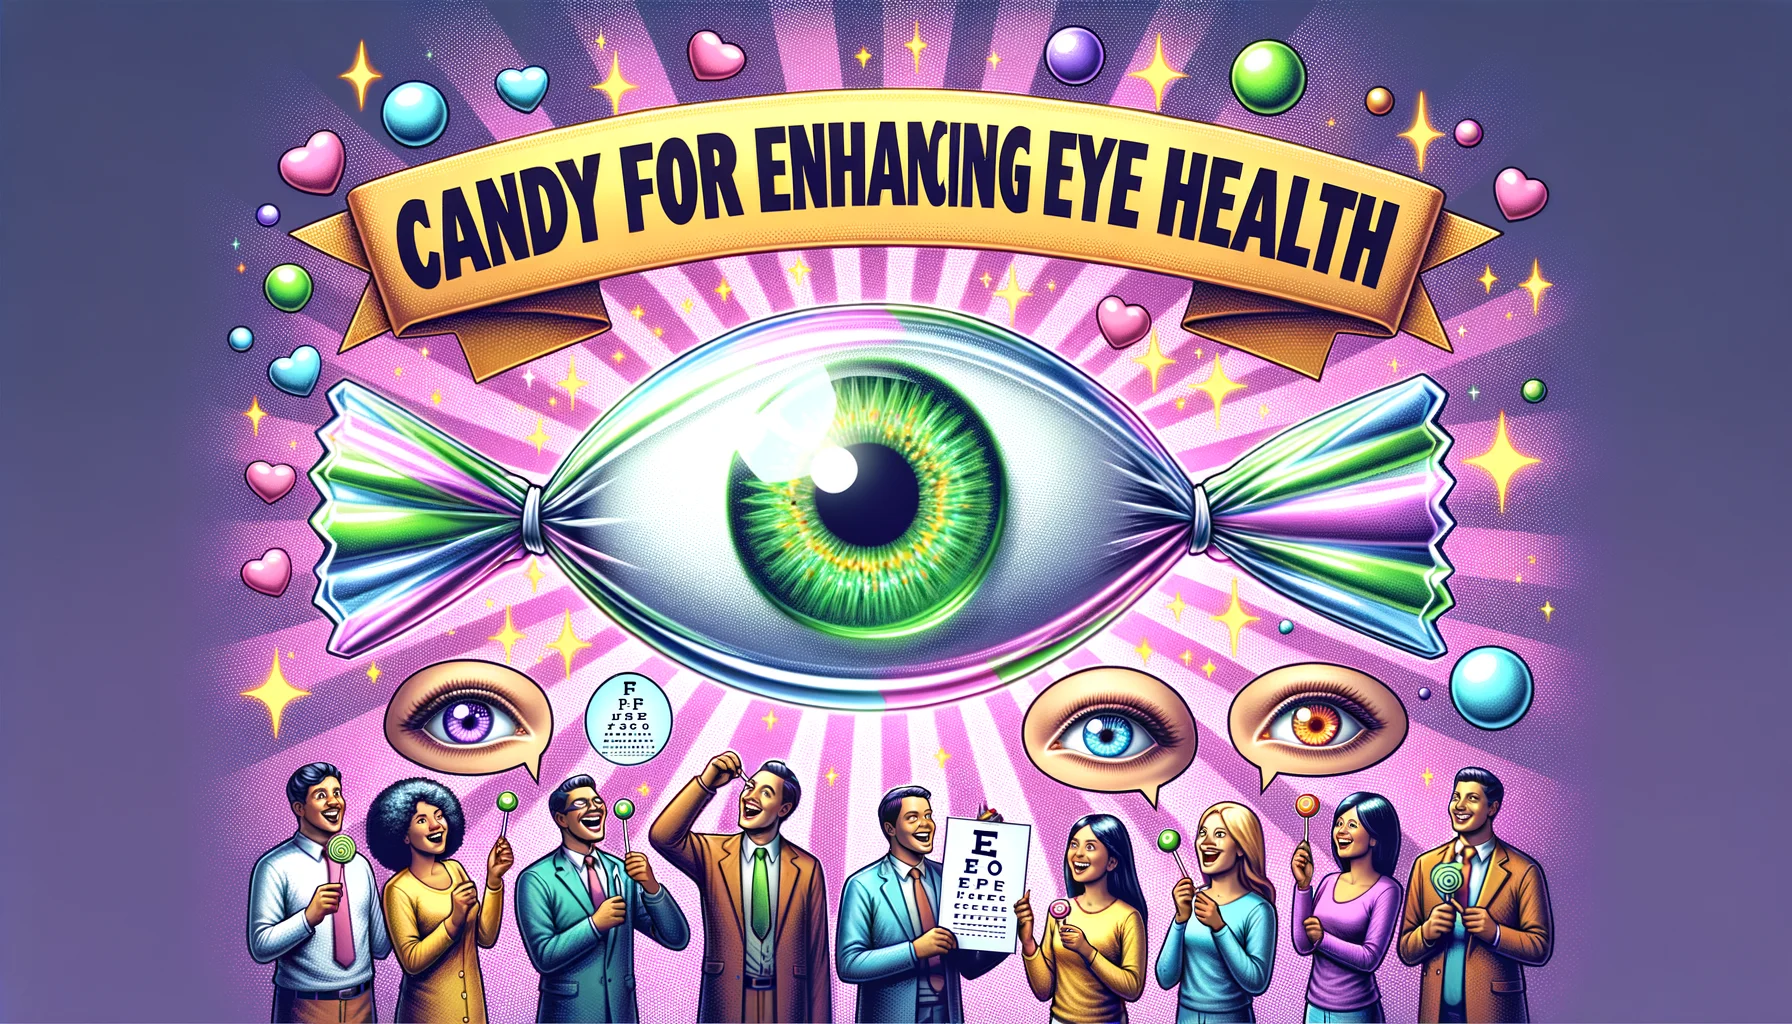 Generate a humorous and realistic image of an ideal situation, showcasing 'Candy for Enhancing Eye Health'. Imagine traditional hard candy, transparent and glowing with playful colors like purple and green. Around it, positive visual symbols for good eye health should be present, such as sparkling bright eyes and eyesight test charts looking clear as day. Also include happy people of various genders and descents eating these candies, their eyes twinkling with health and good vision. All this under a banner that reads 'Candy for Enhancing Eye Health', in bold bright letters.